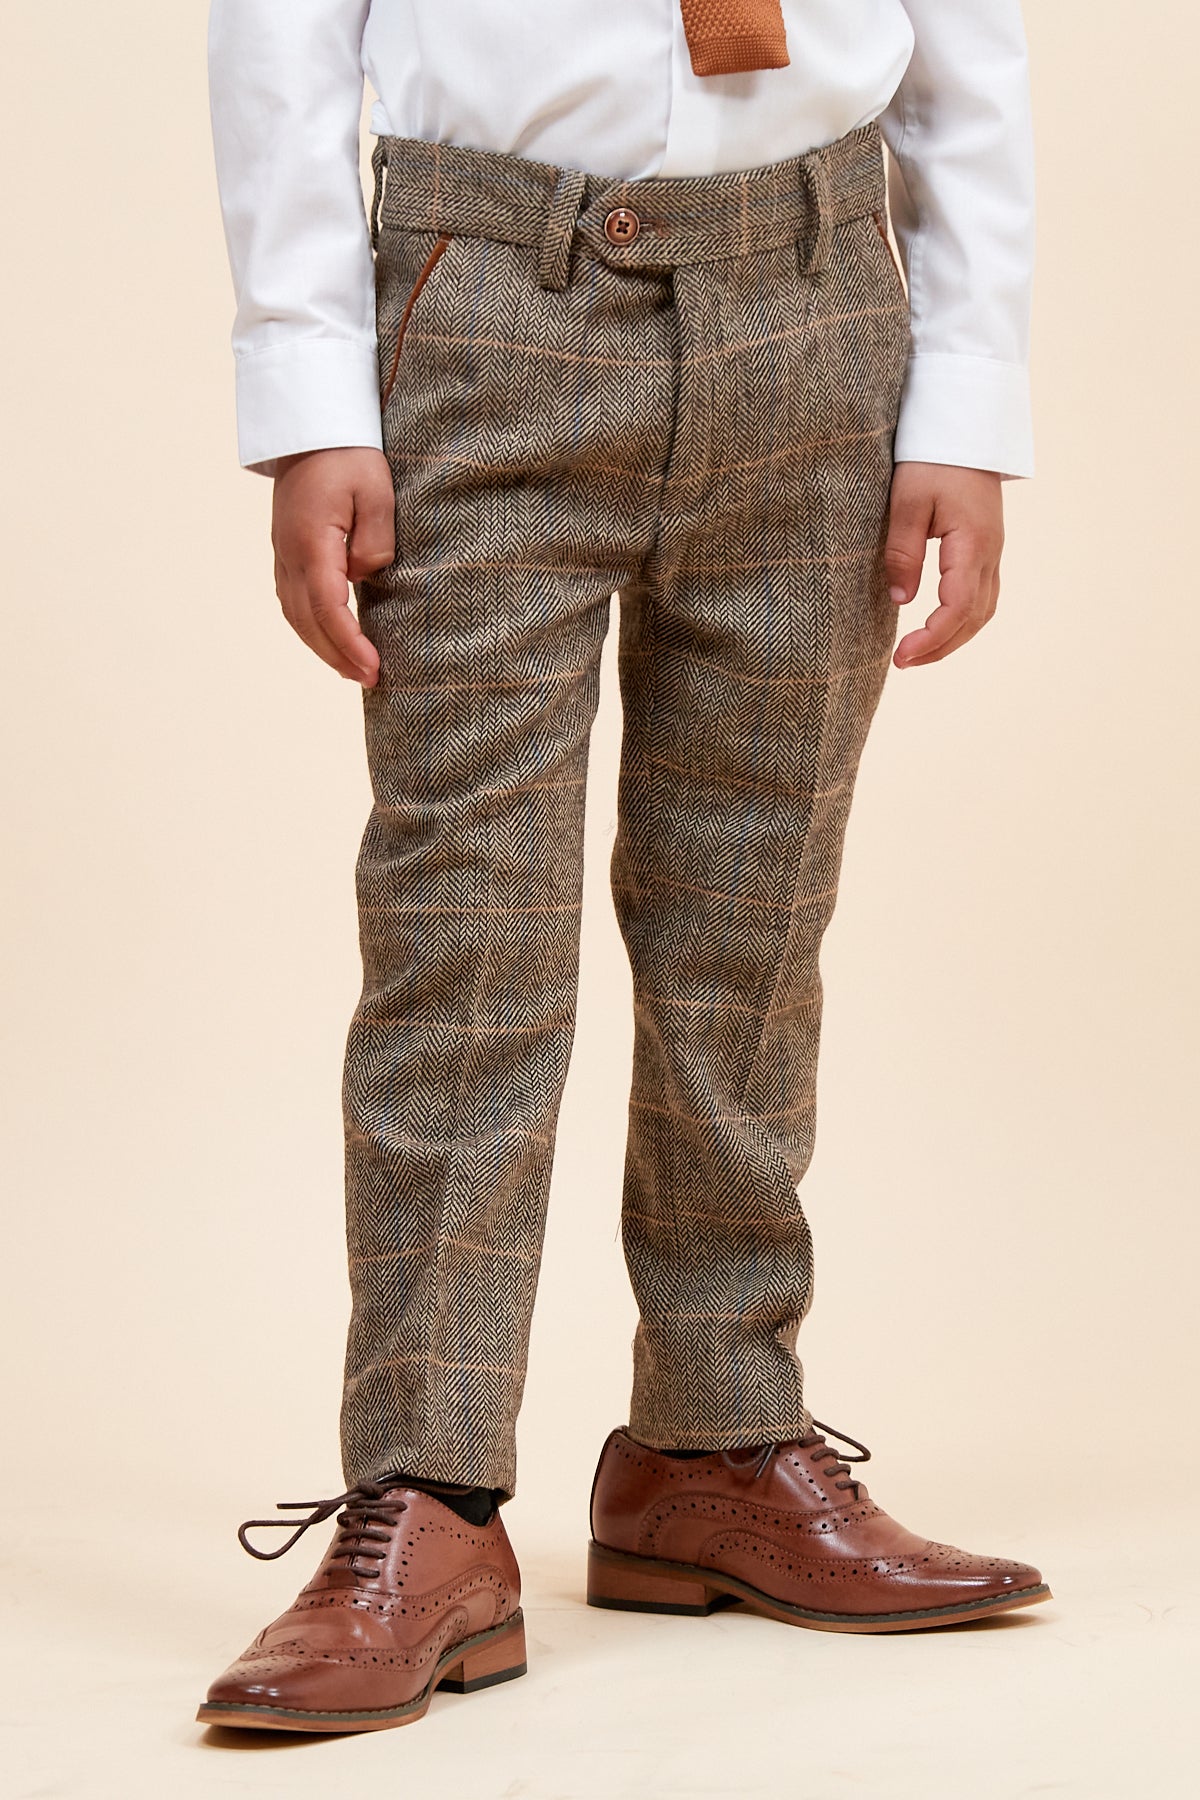 TED - Childrens Tan Tweed Check Three Piece Suit-Childrens Suits-marcdarcy-Marc Darcy